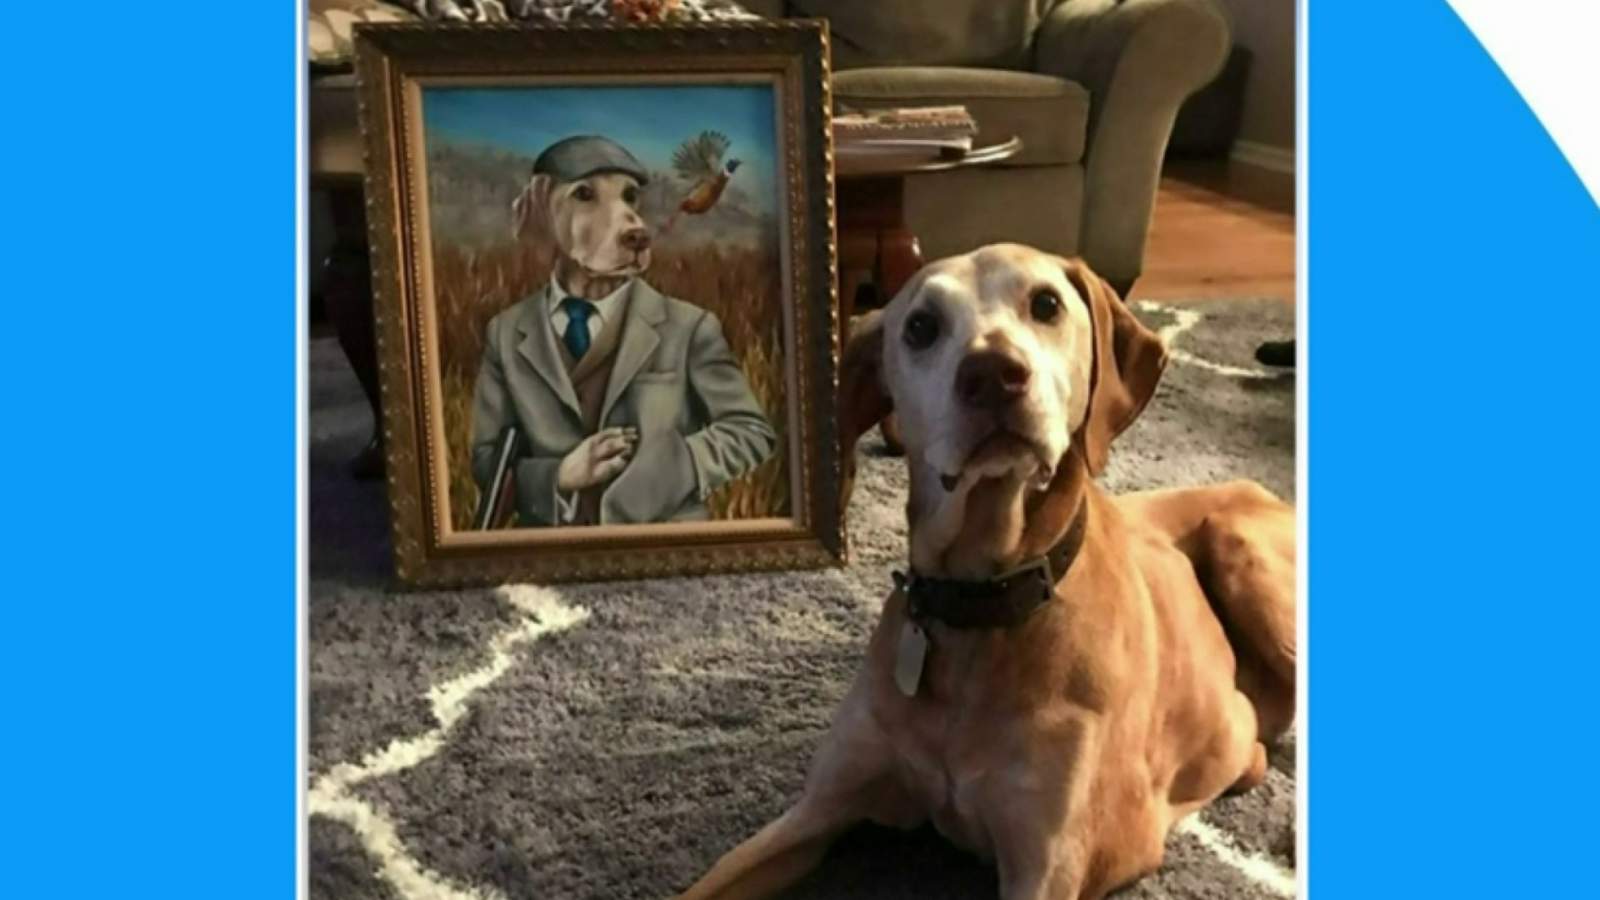 Capture your pet’s personality in a hand-painted portrait